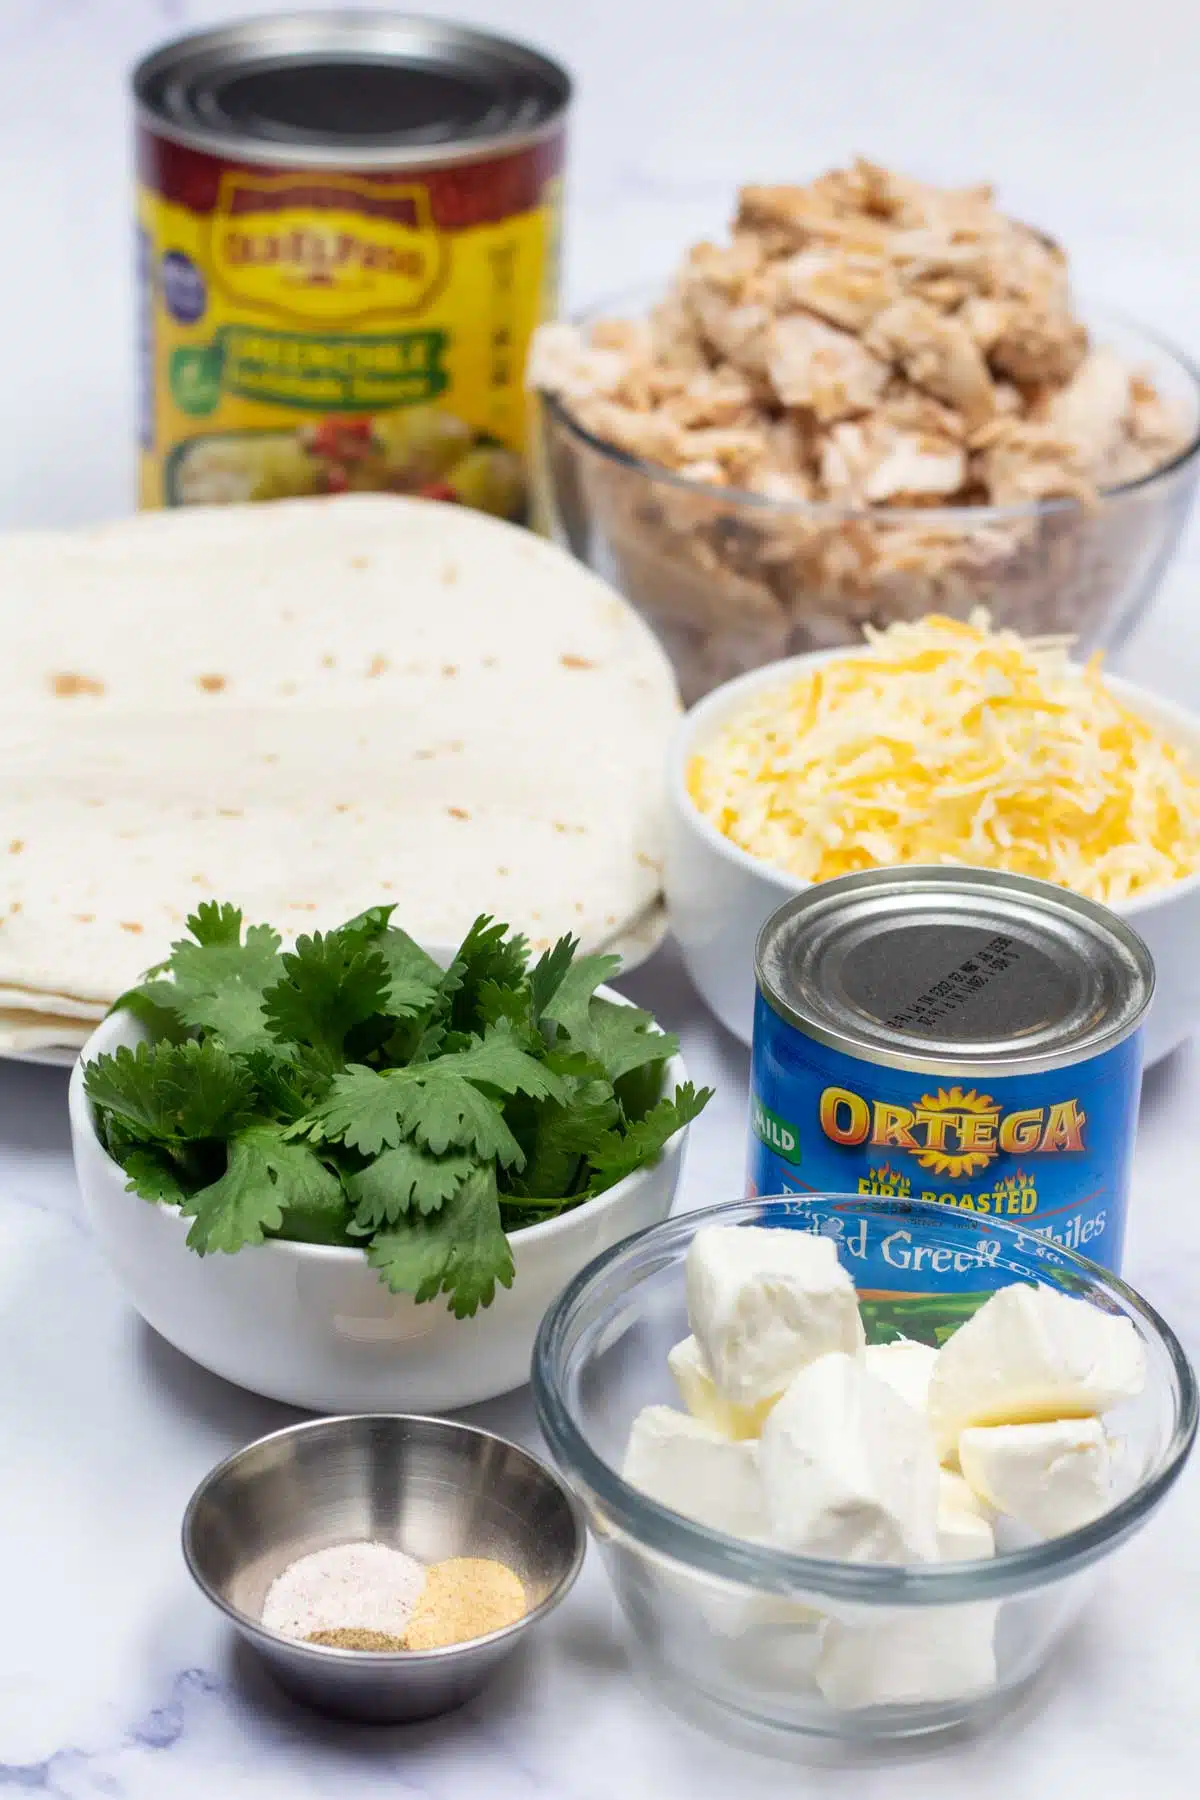 Tall image showing chicken enchiladas with green sauce ingredients.